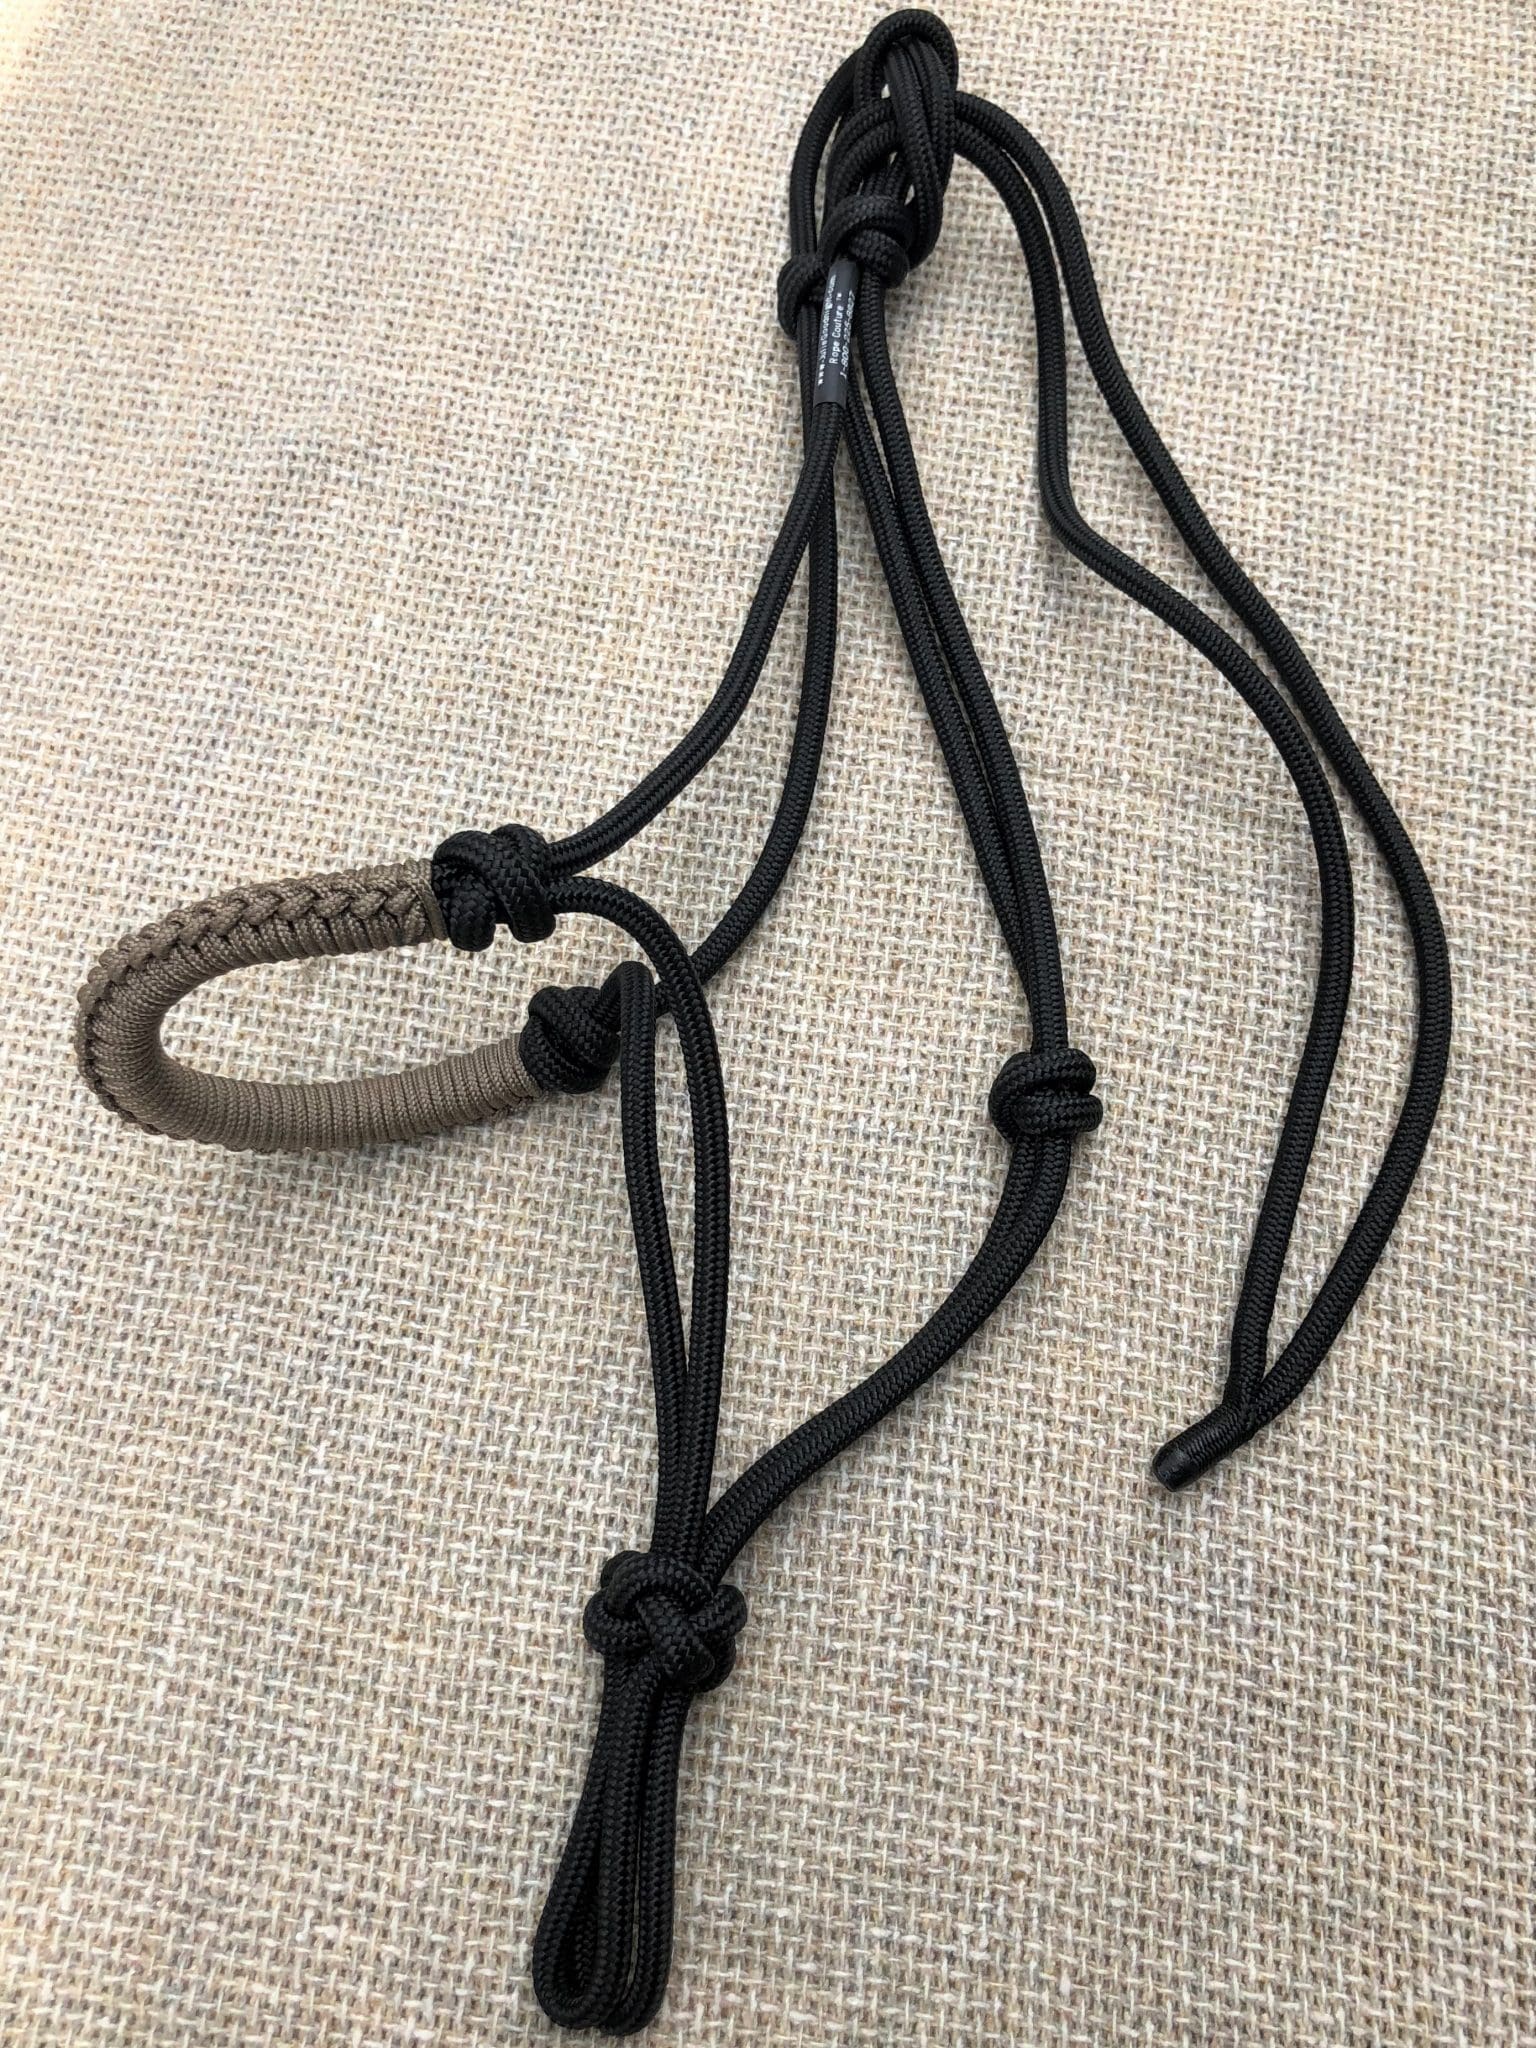 iFCOW Dog Slip Lead 2m 20mm Thickened Colorful Woven Bolt Rope Soft Horse Riding Lead Rope Halter